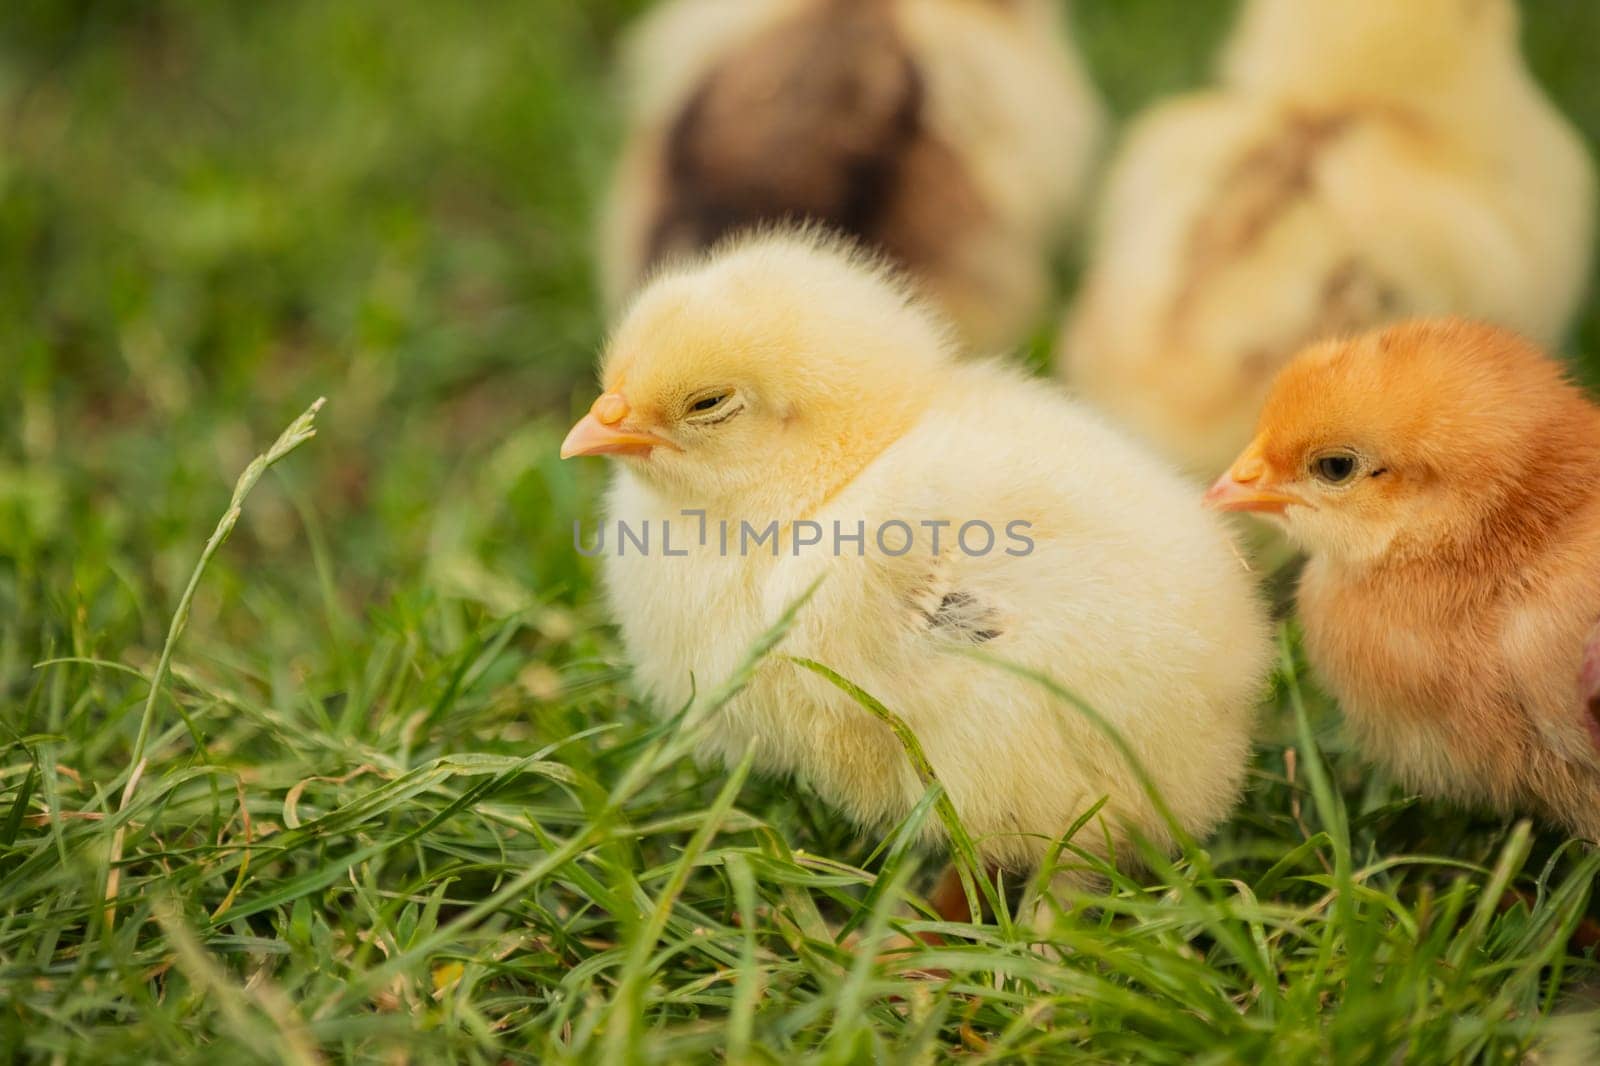 yellow little chickens walk on the grass, close-up